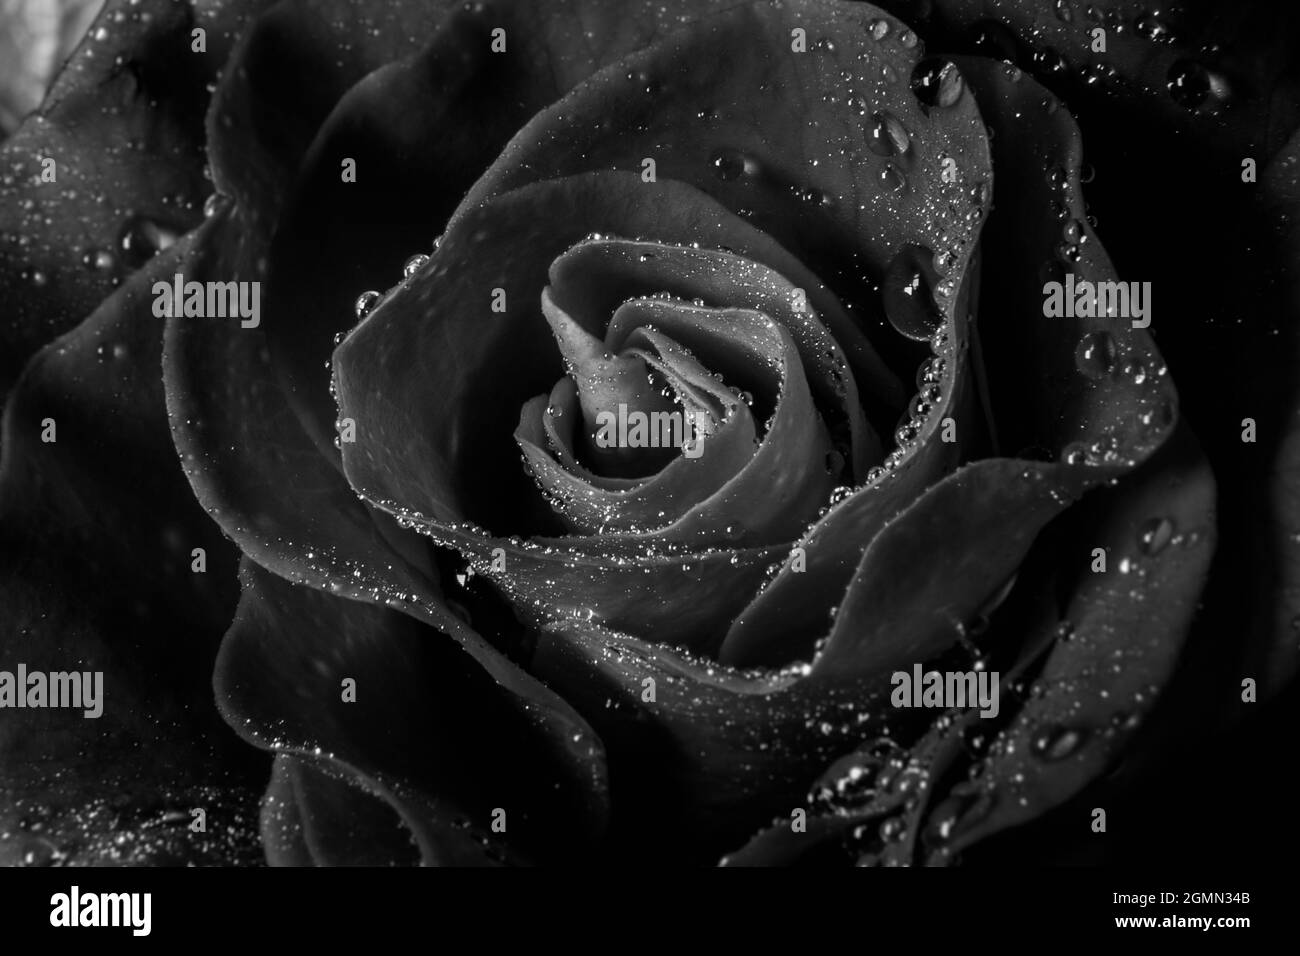 Red rose Black and White Stock Photos & Images - Alamy